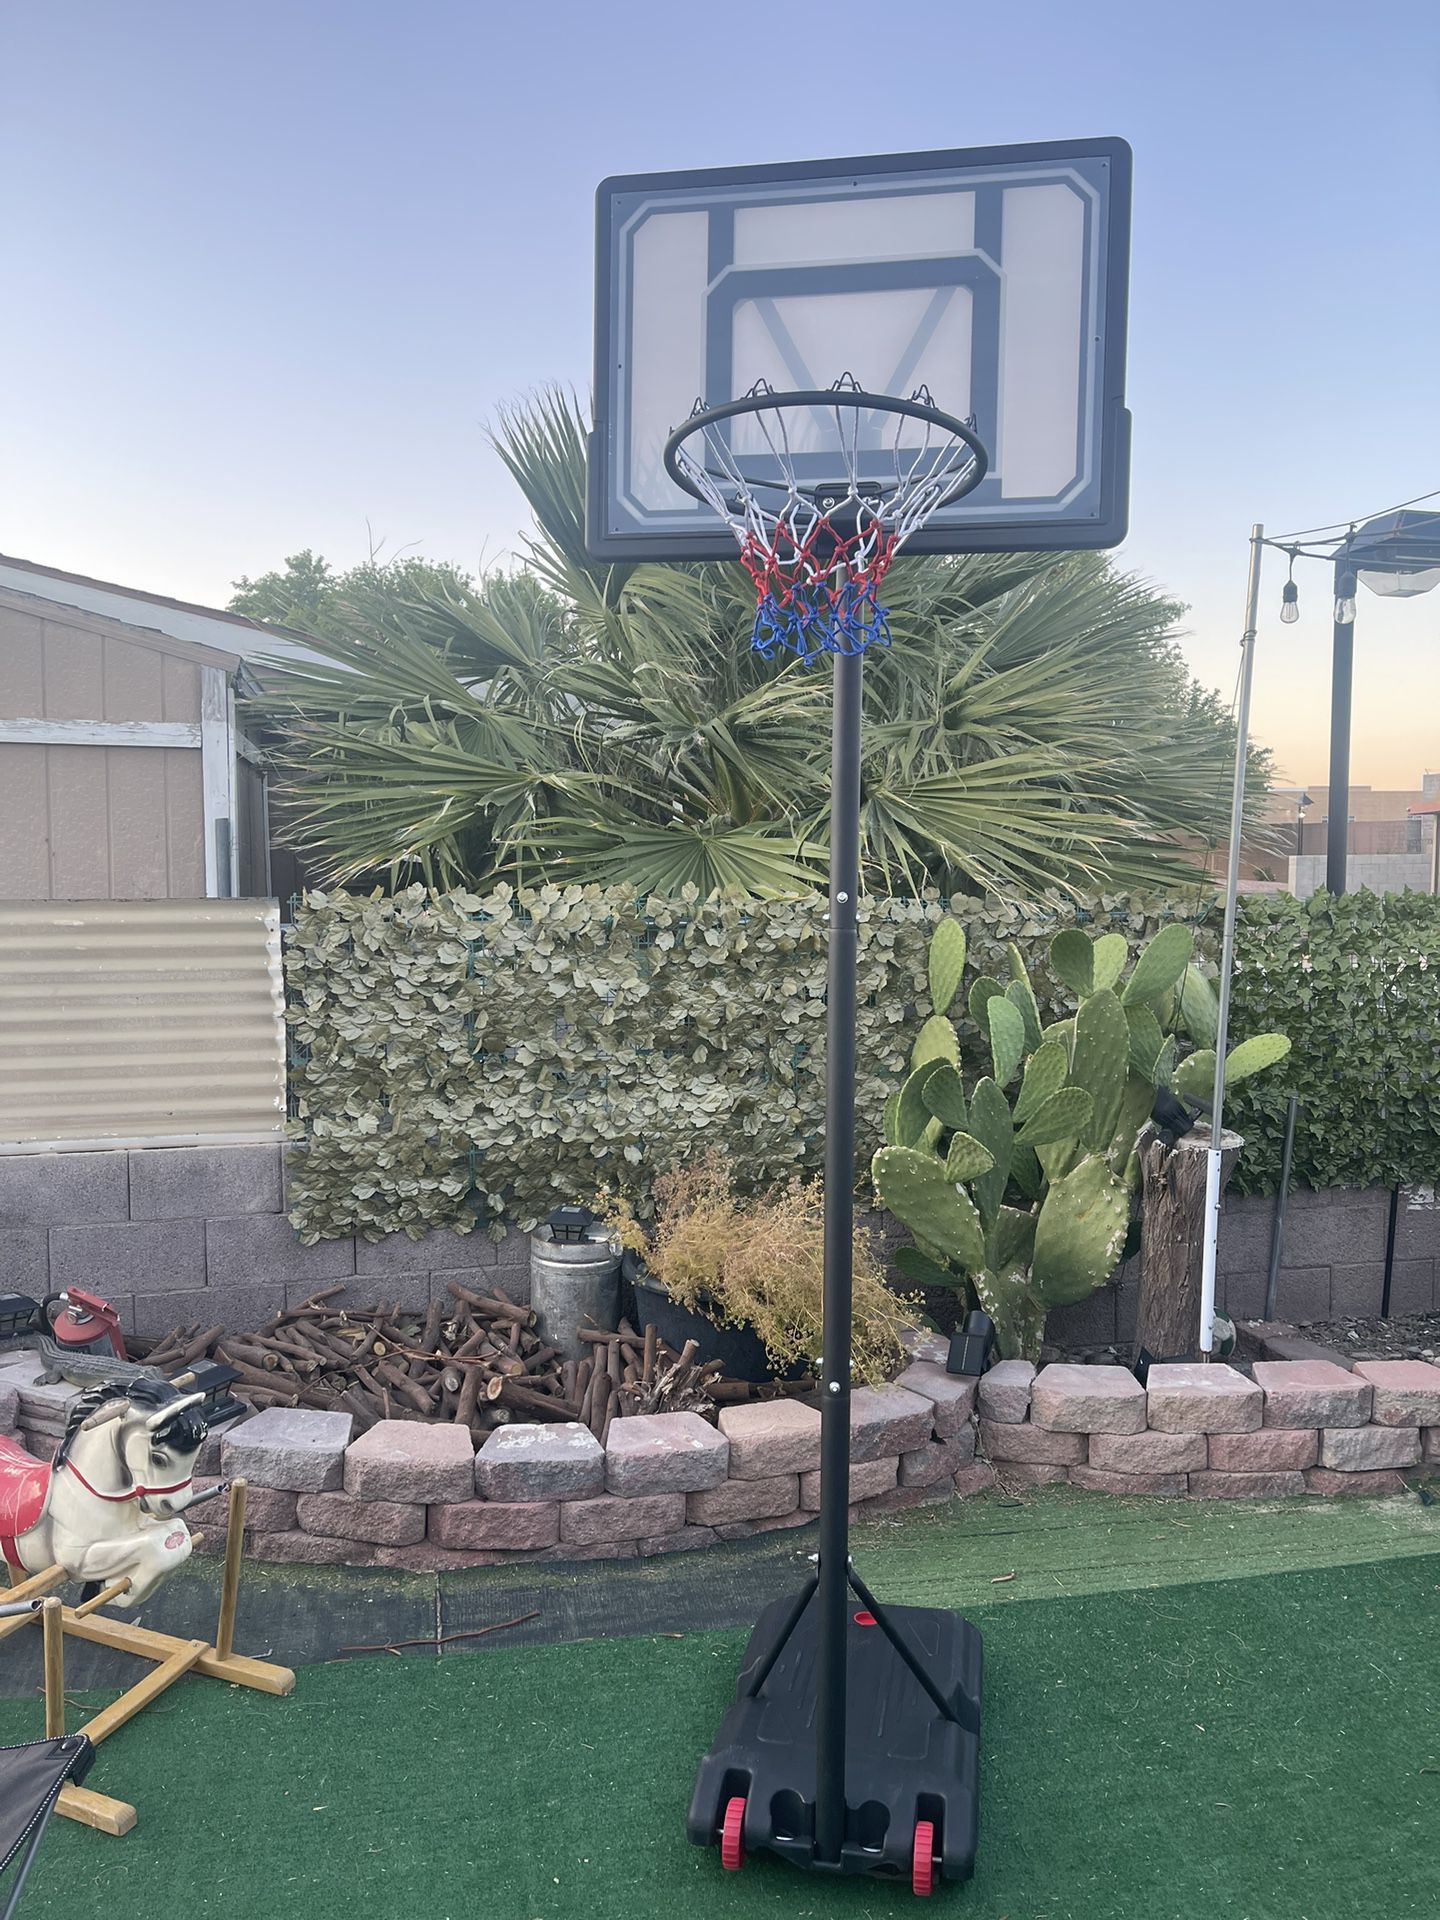 Basketball Hoop New Asking $65 It’s 7 Ft Tall To The Basket Hoop And 106”tall All Together 